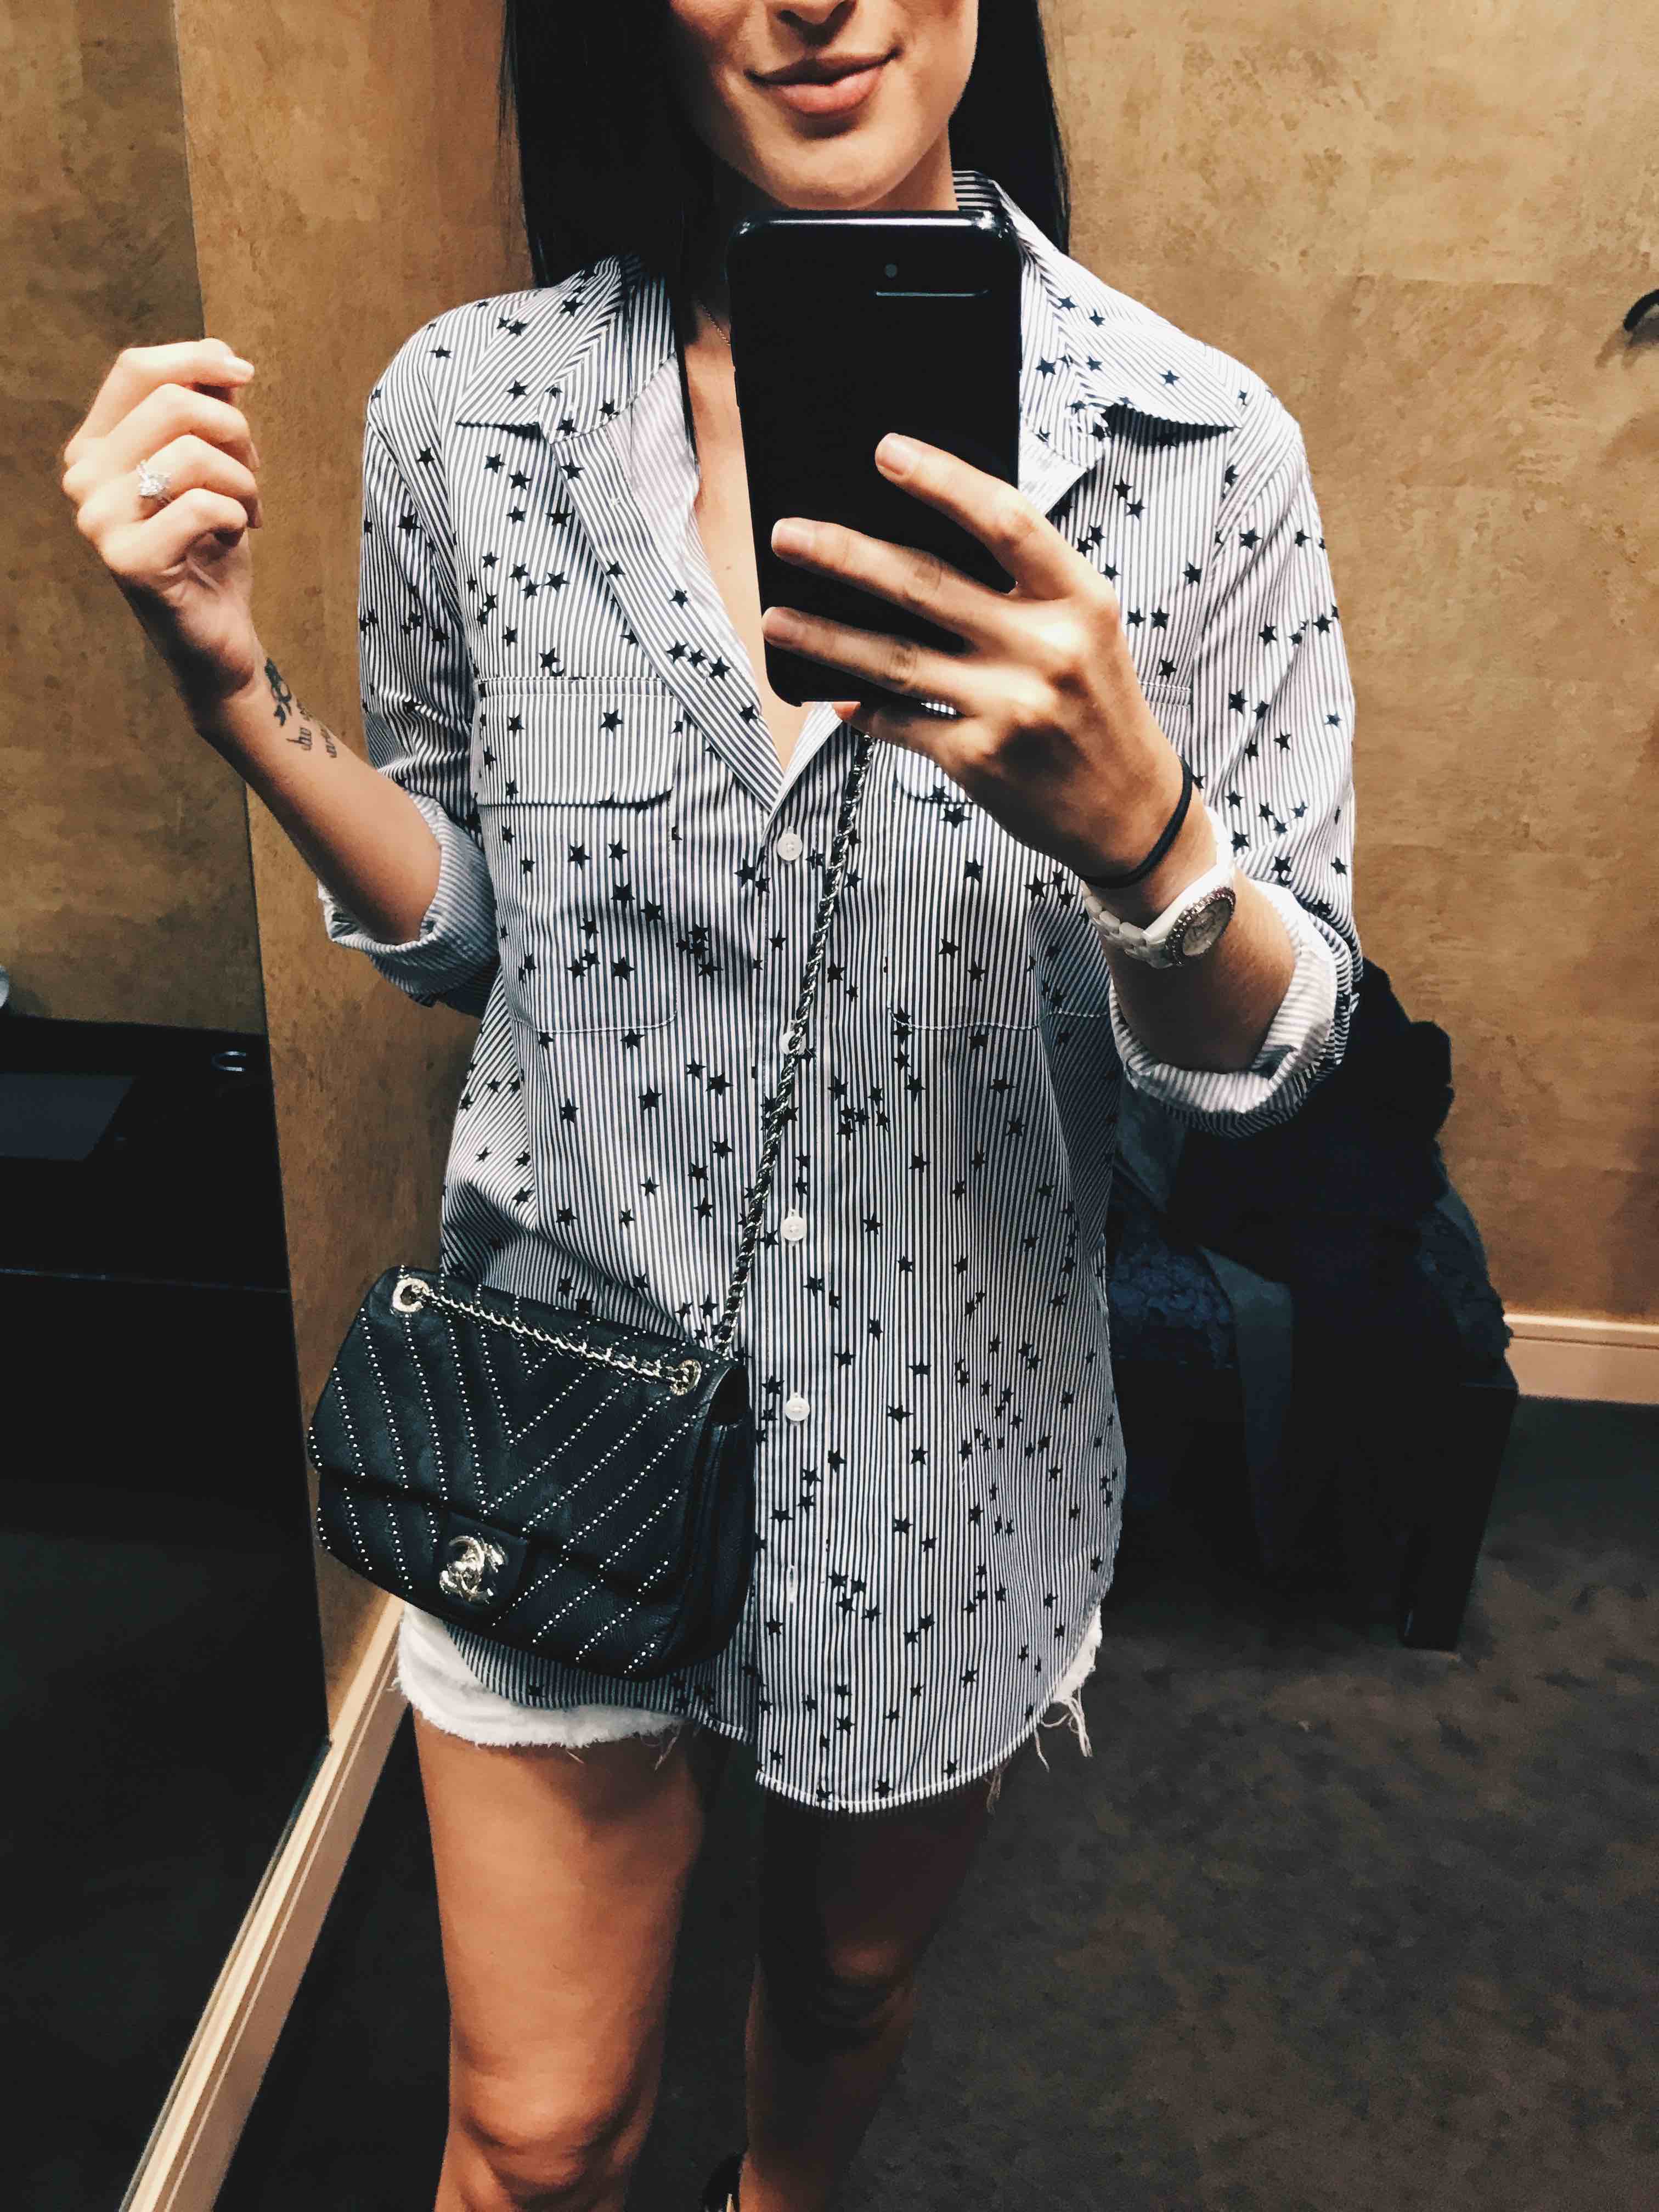 Austin Blogger DTKAustin has compiled a try-on guide of her top picks from the Nordstrom Anniversary Sale that are still in stock!